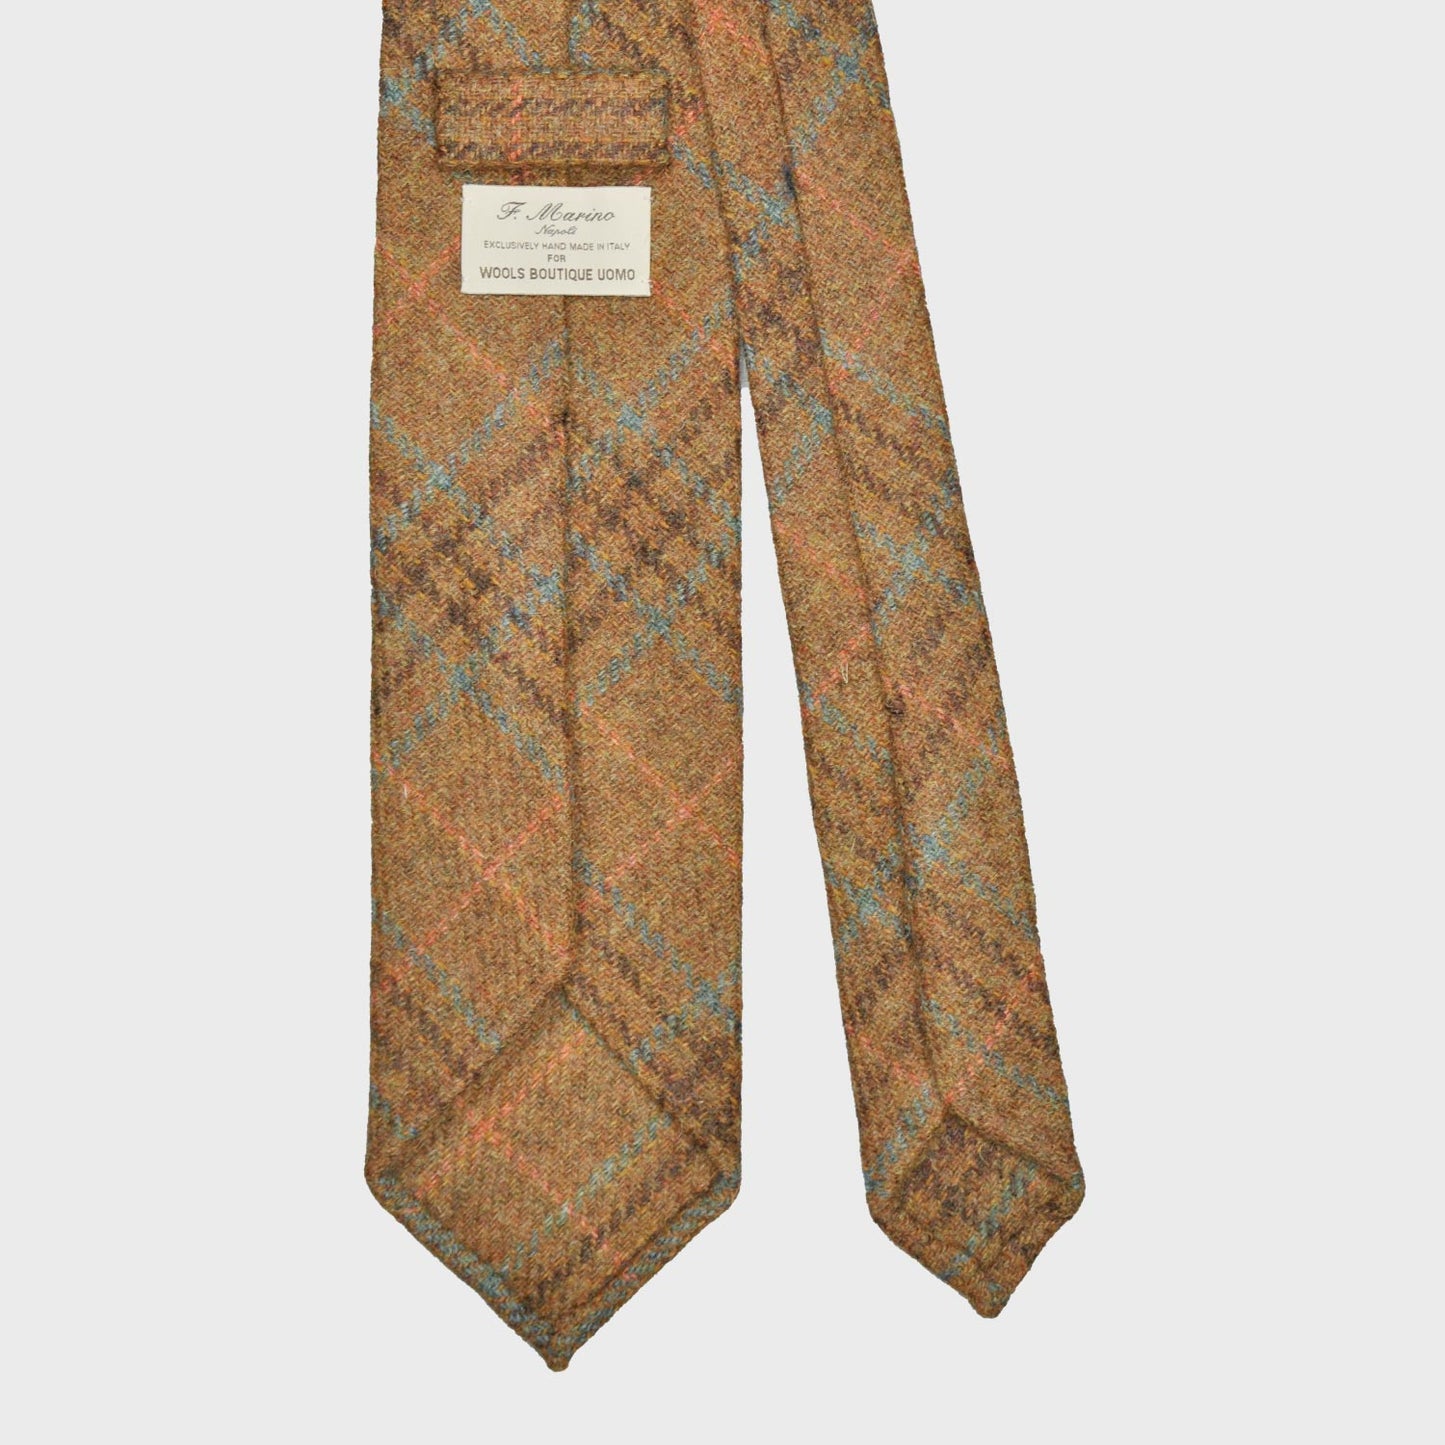 Load image into Gallery viewer, F.Marino Tweed Tie 3 Folds Glen Plaid Copper Brown-Wools Boutique Uomo
